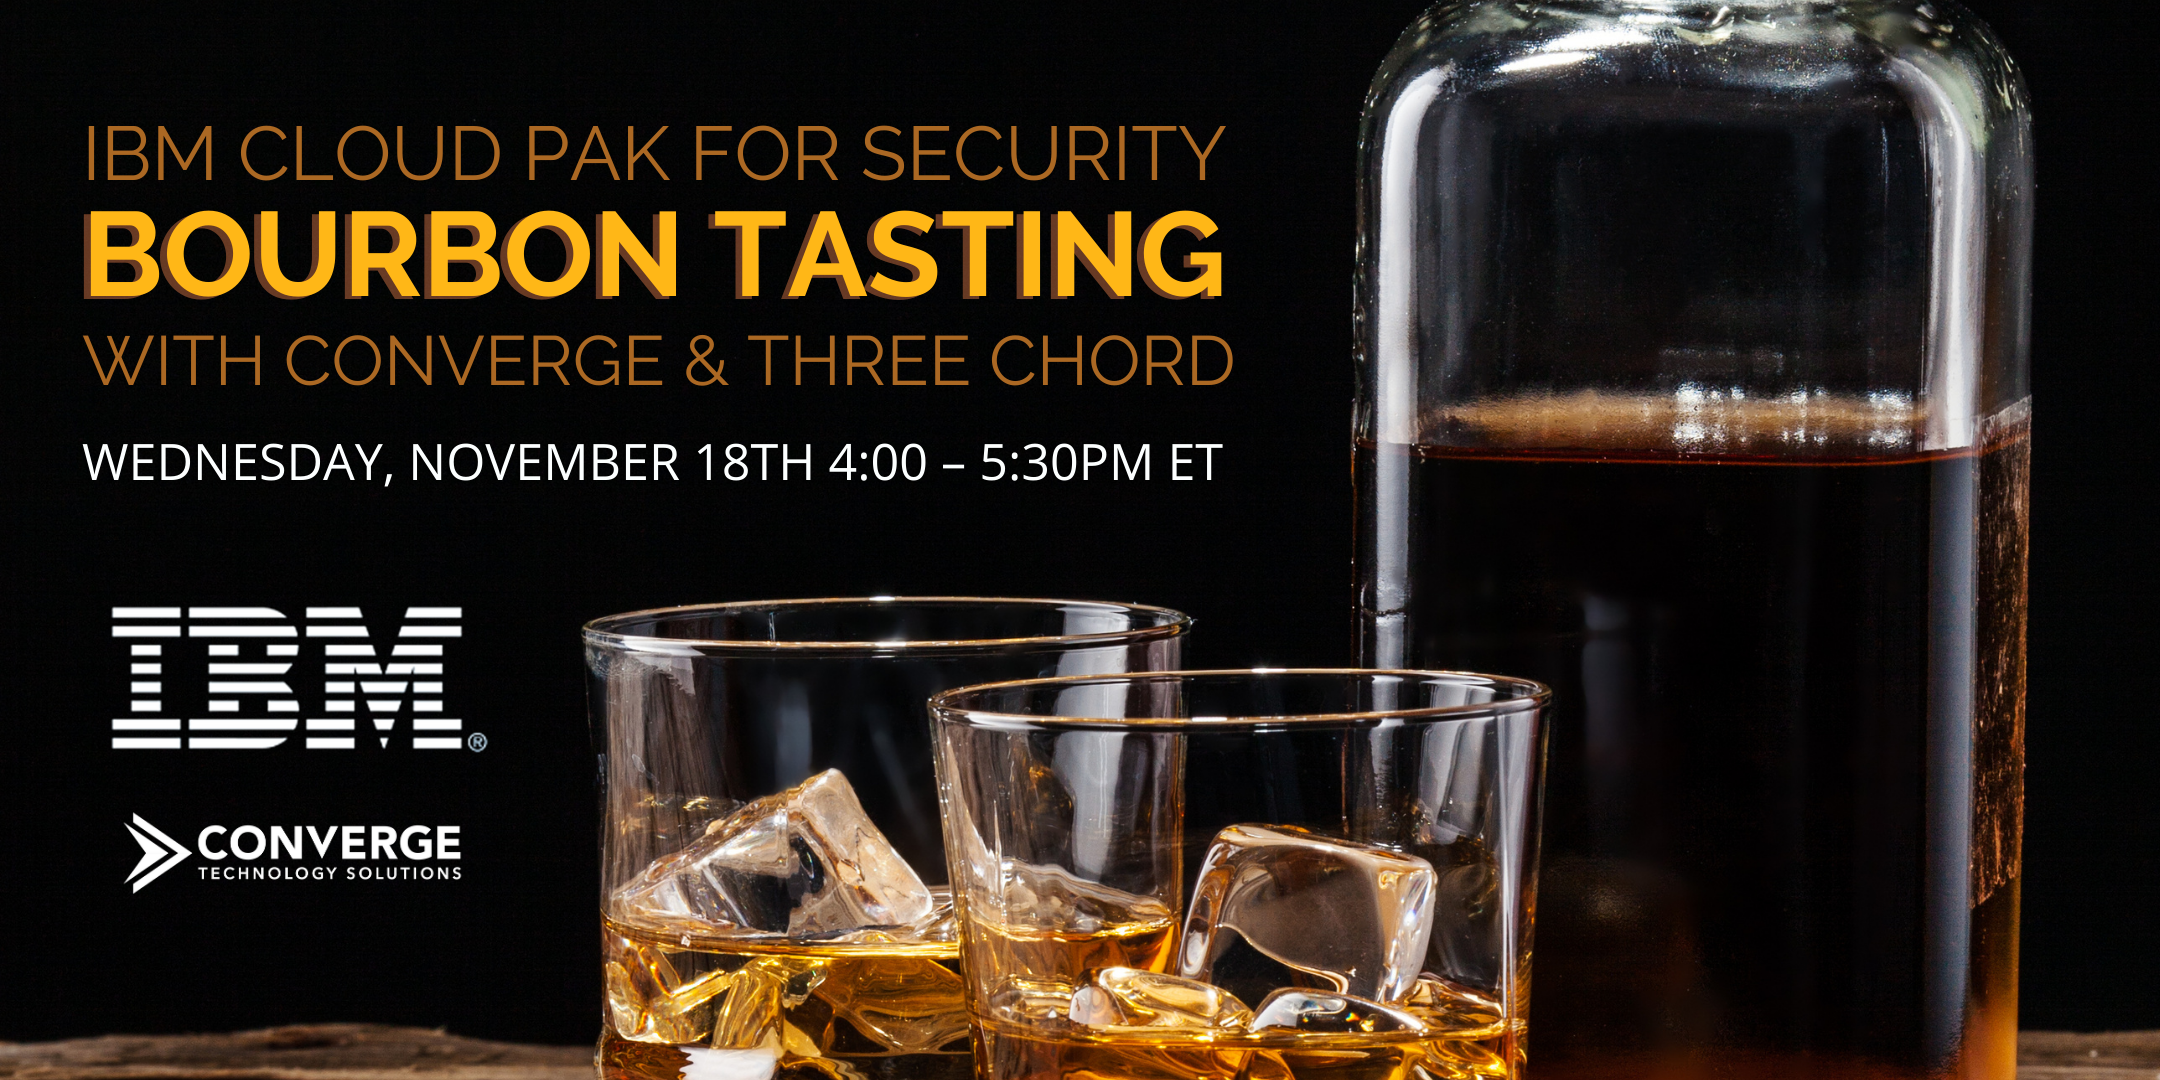 IBM Cloud Pak for Security Bourbon Tasting with Converge and Three Chord